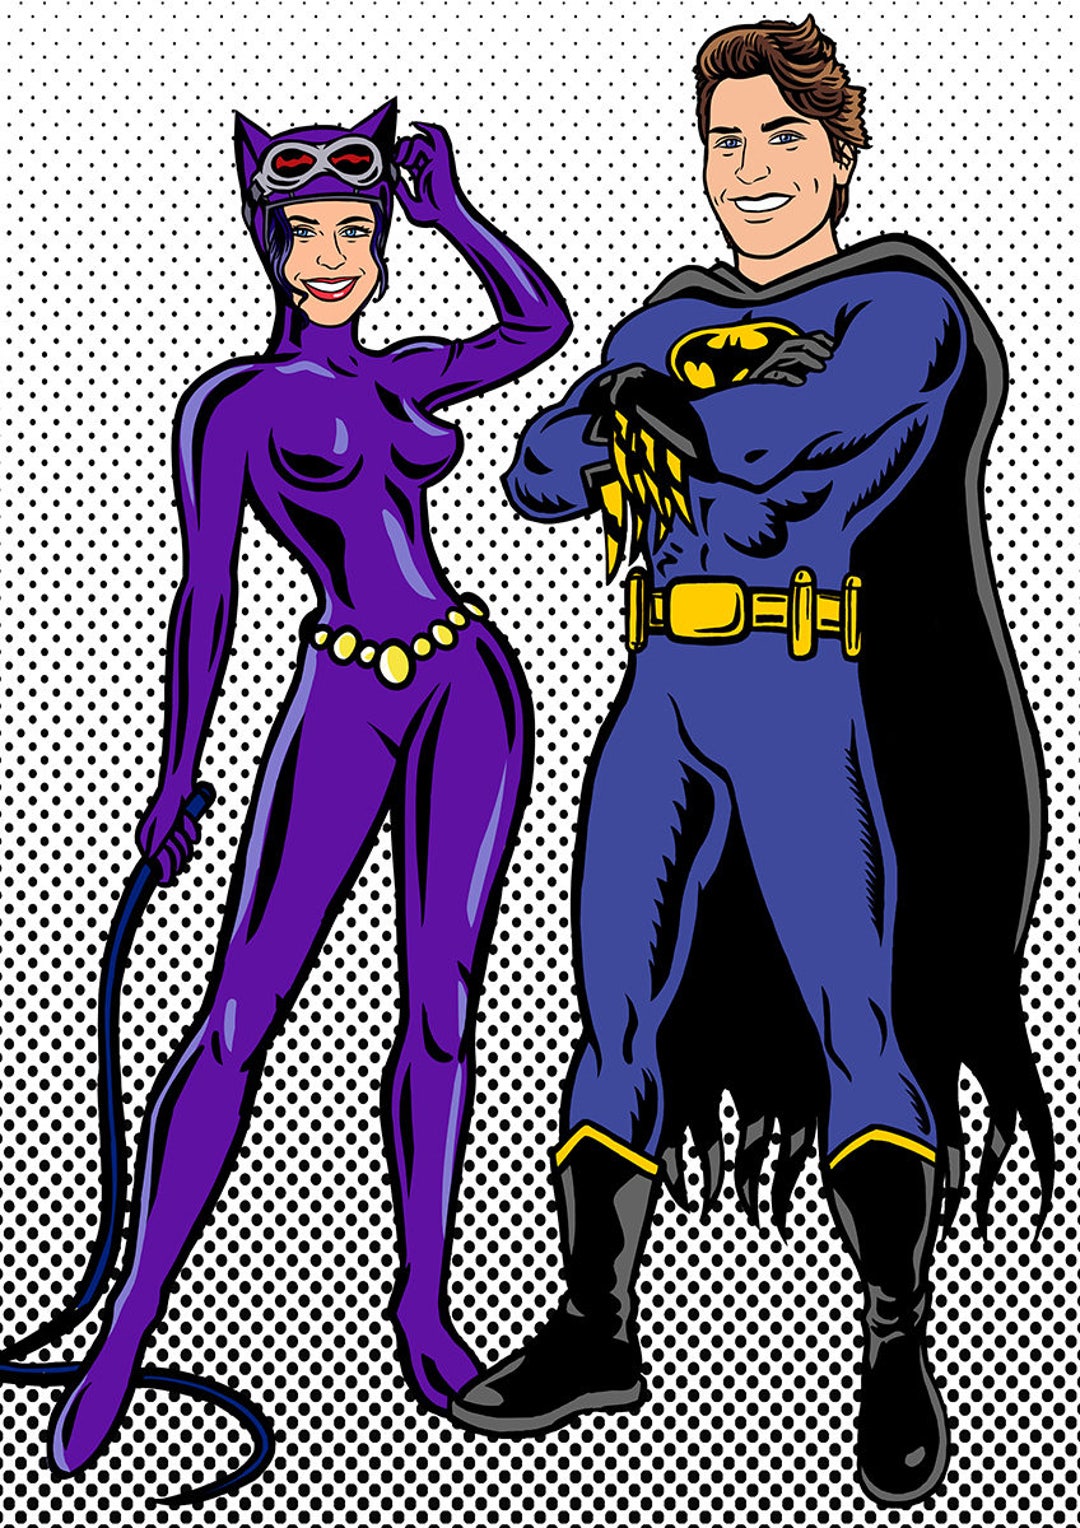 catwoman and batman couple costumes